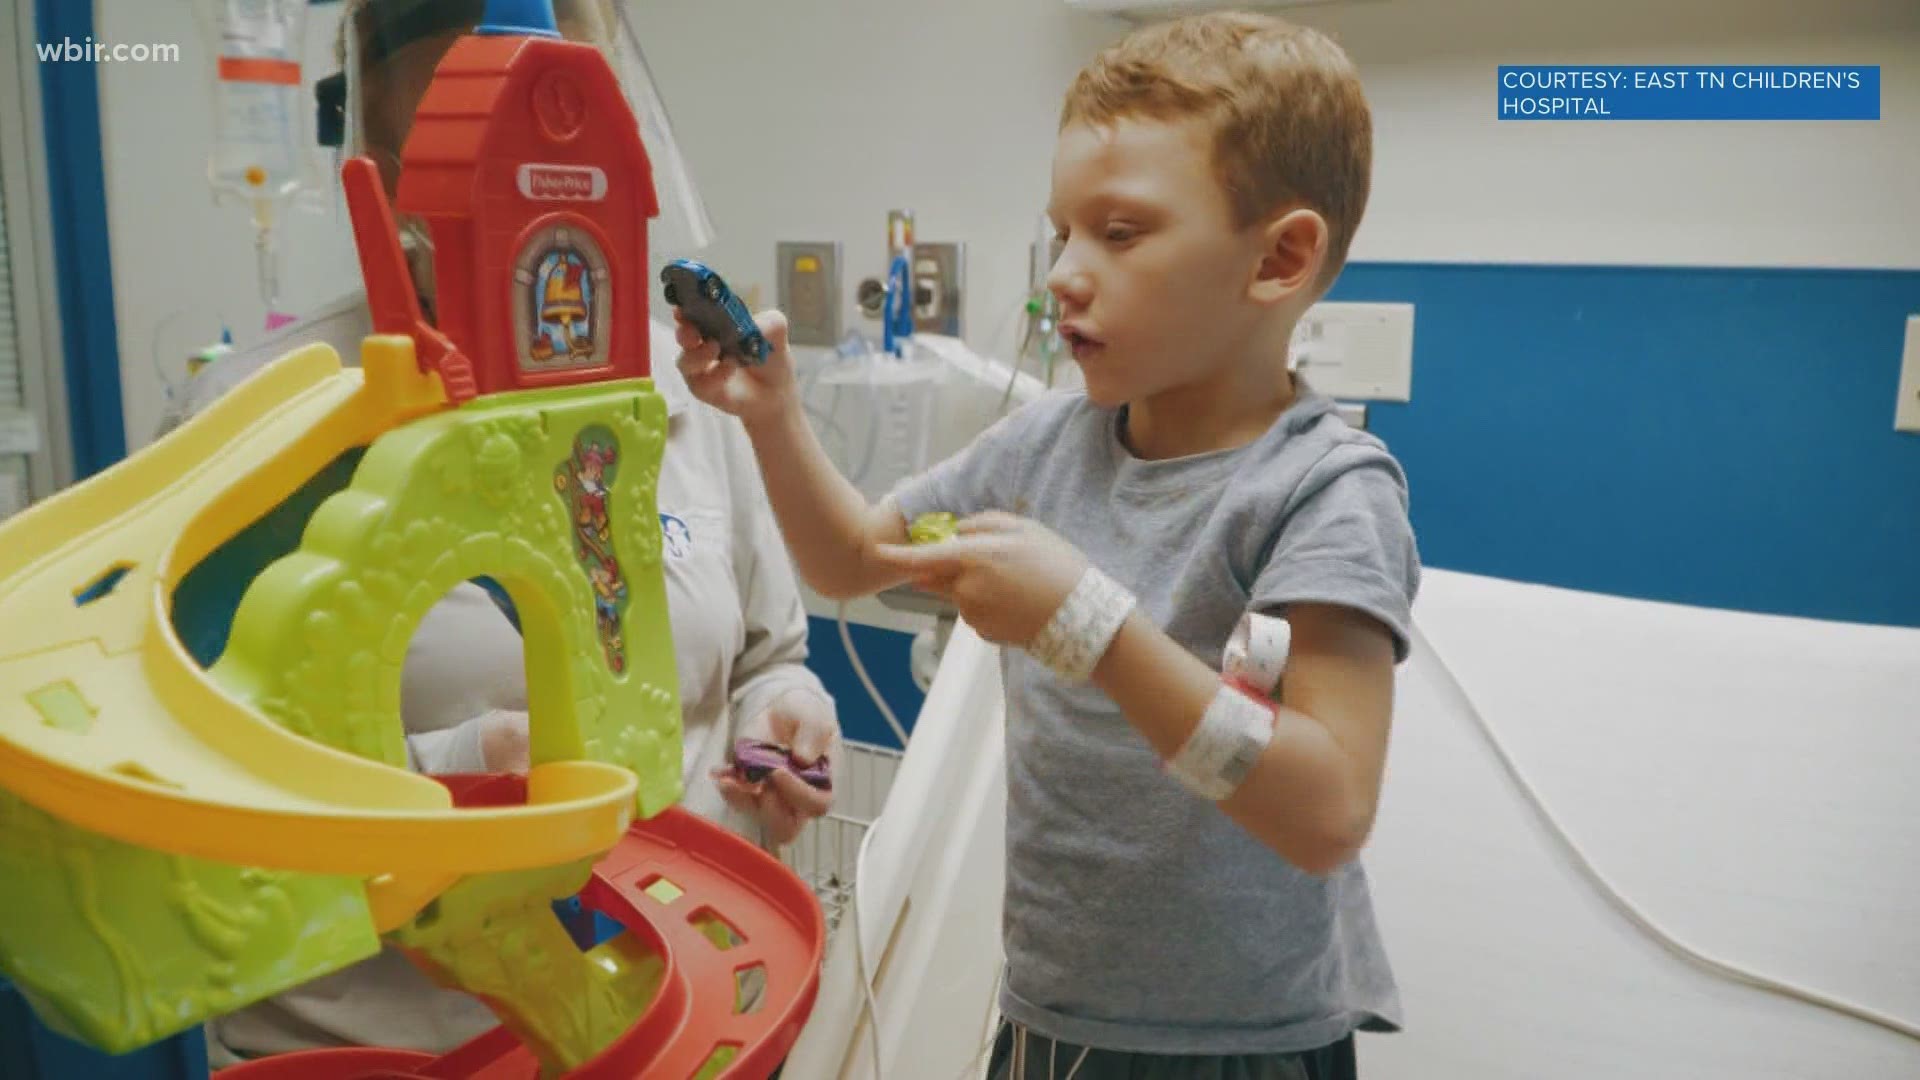 In just one year, 4-year-old Cooper Stansbury has conquered six rounds of chemotherapy, two stem cell transplants and 14 days of proton therapy.